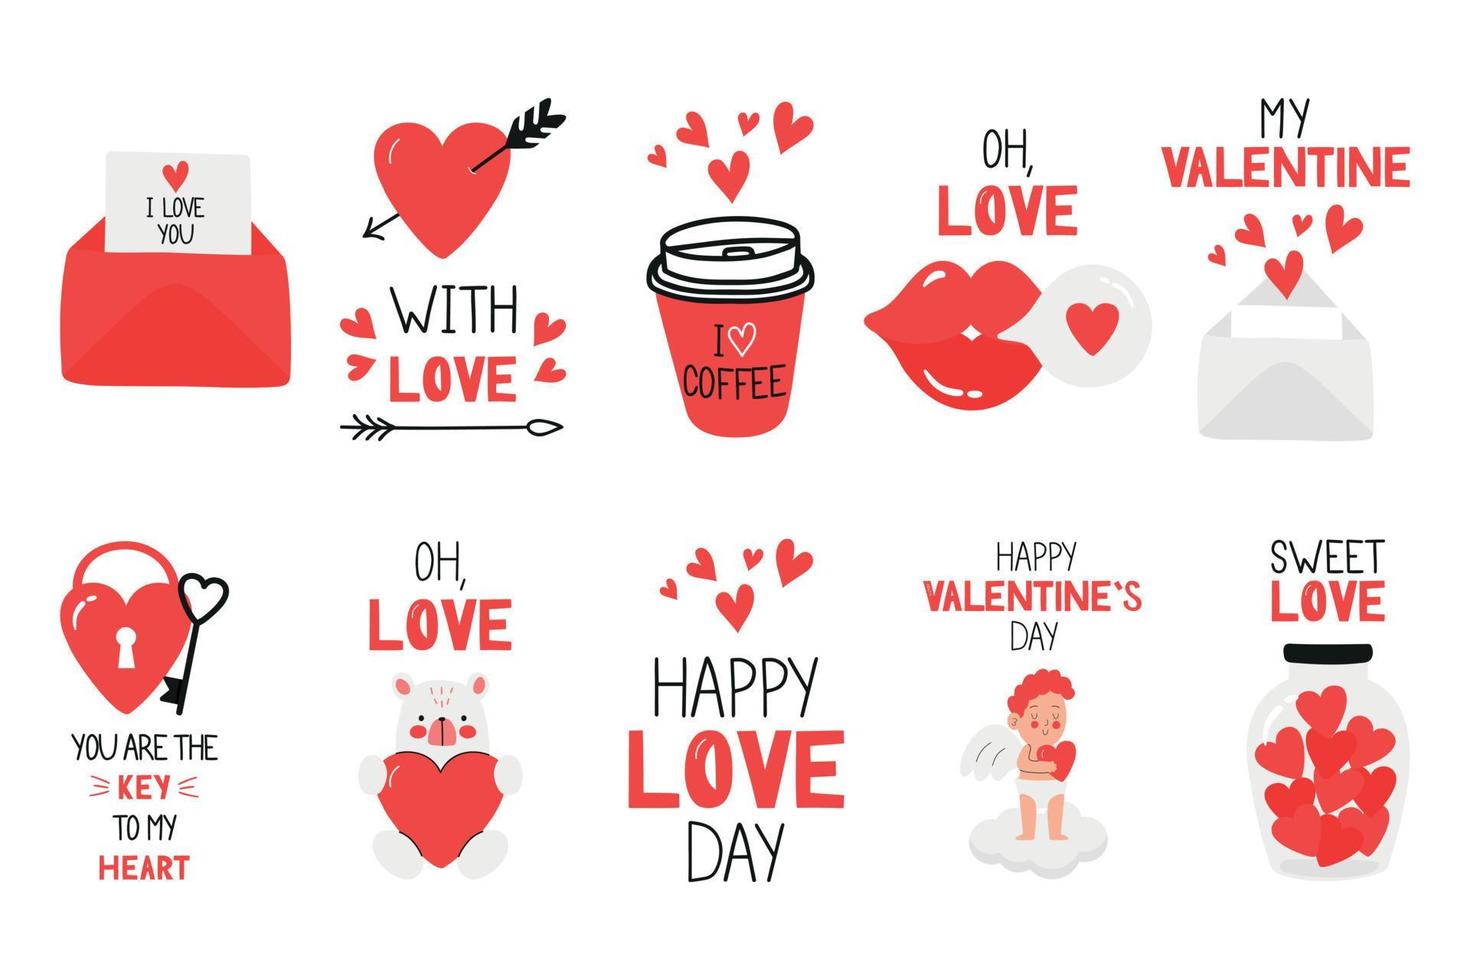 Valentines day vector clipart set with hearts and love romantic messages in red, grey and white colours.